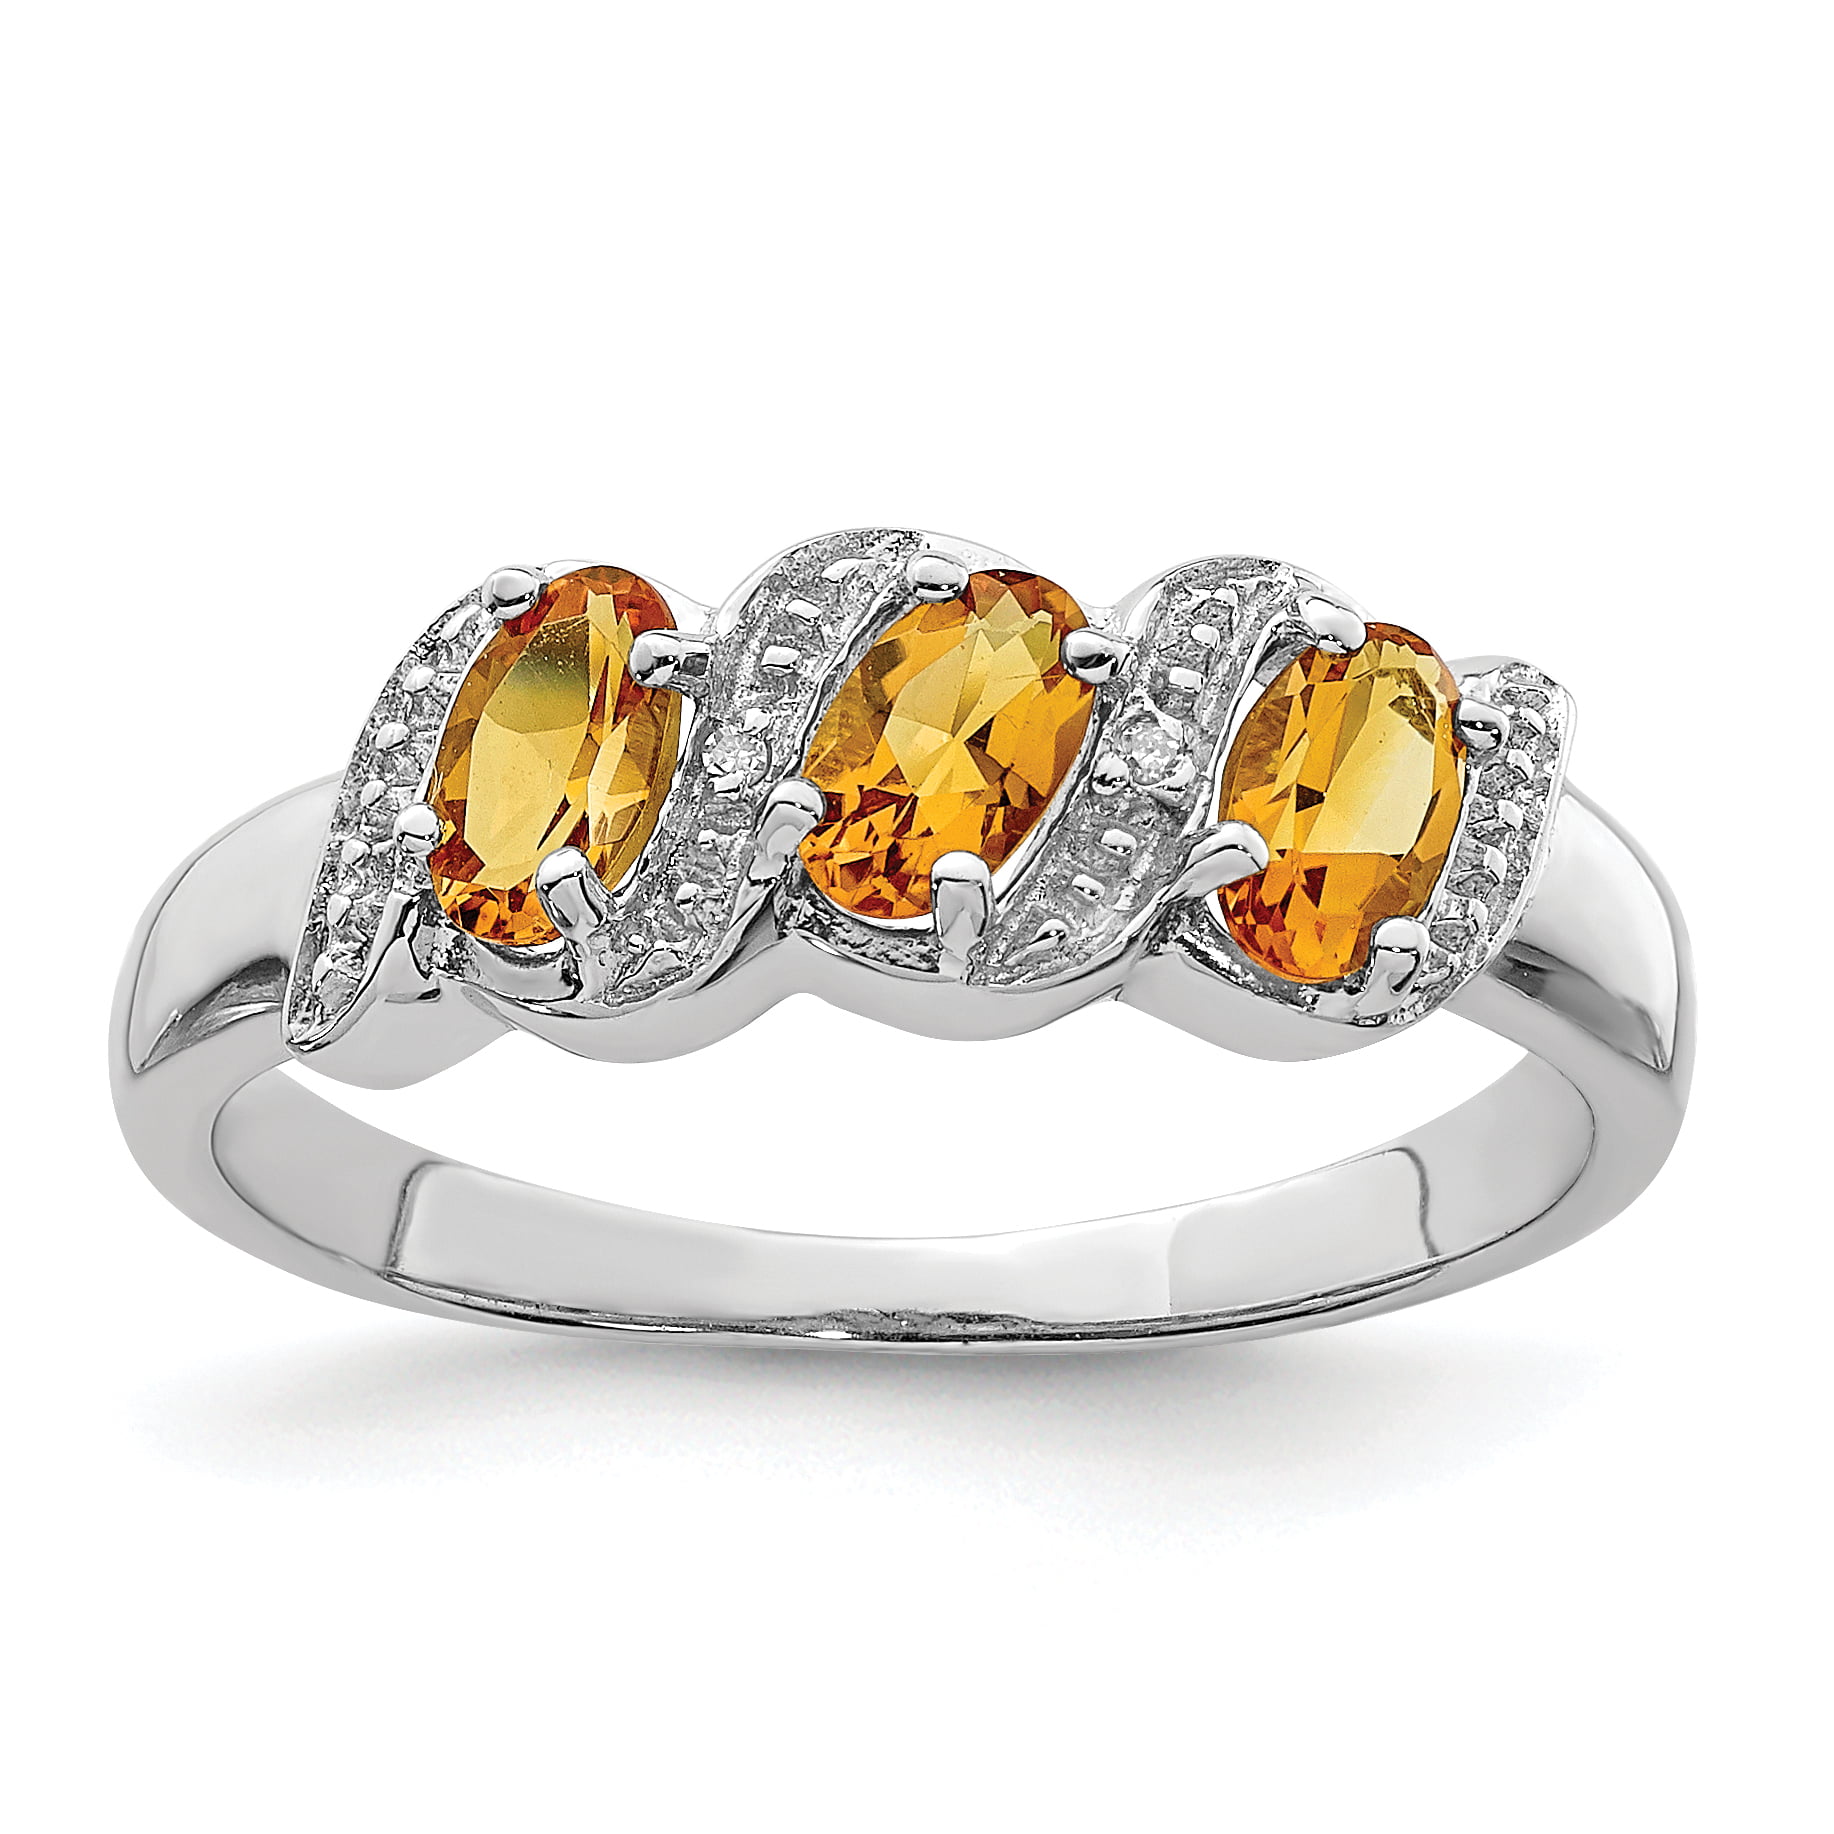 10 5 6 7 8 9 Ring Size Options 925 Sterling Silver Polished Open back Citrine Ring Jewelry Gifts for Women 